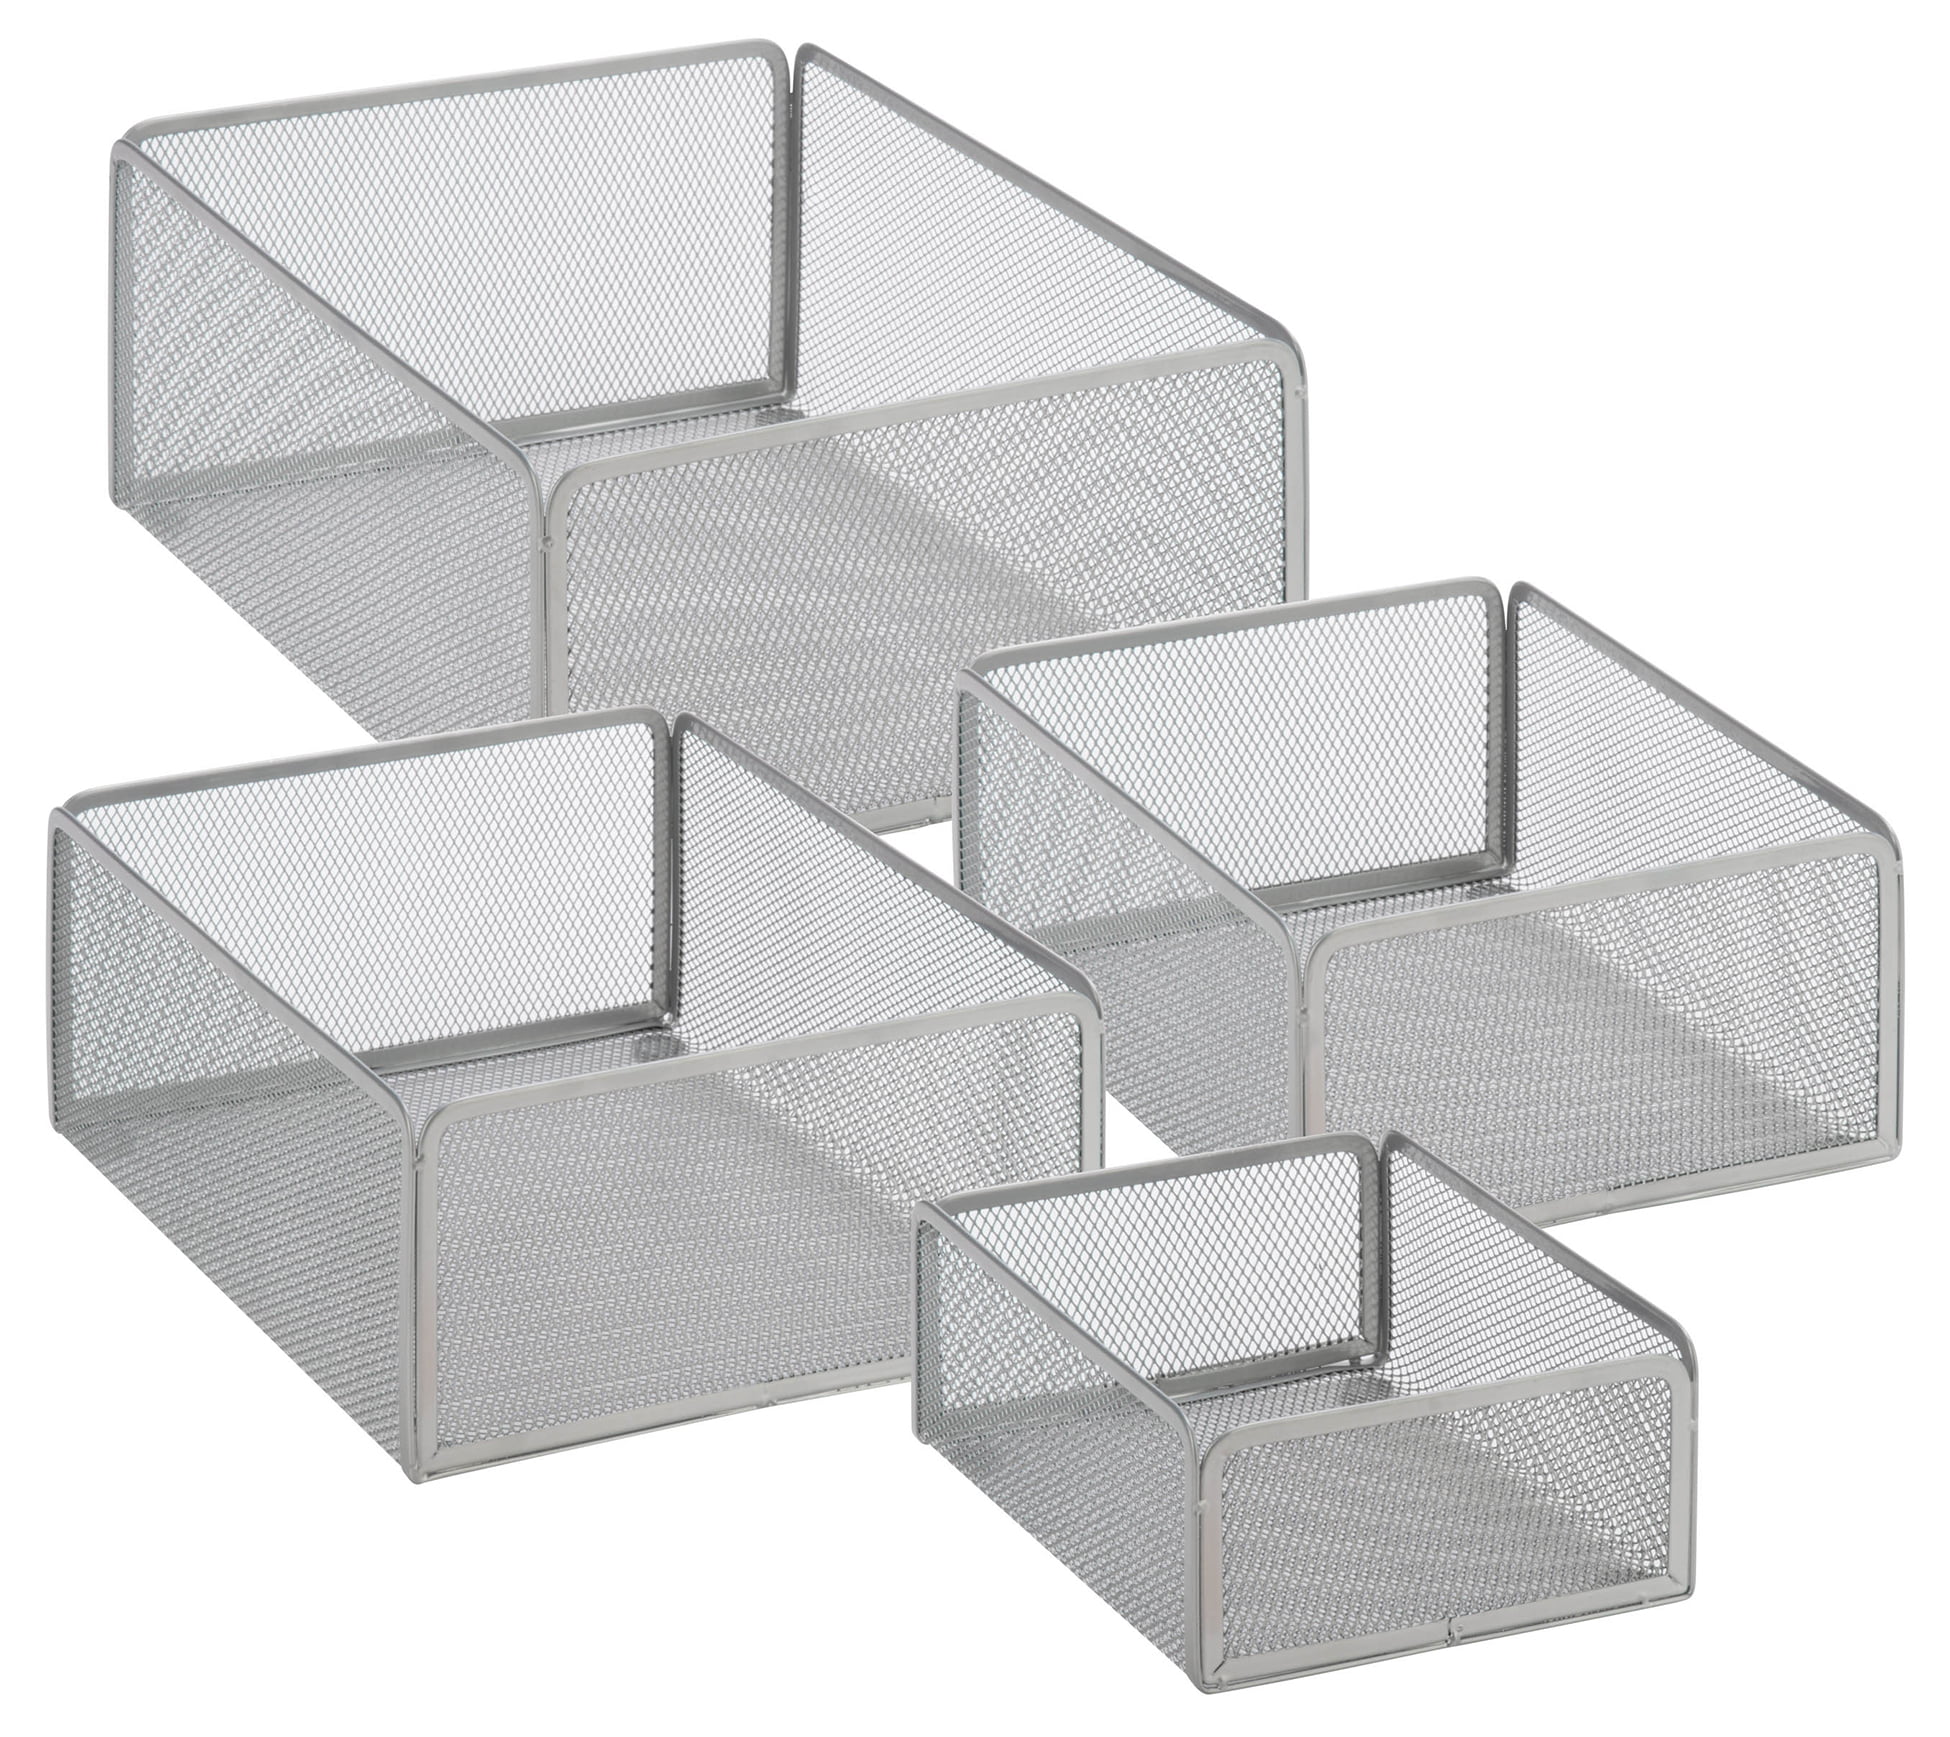 G.E.T Pack of 1 Enterprises Chrome Oval Metal Wire Basket Metal Wire Baskets Collection 4-20144 